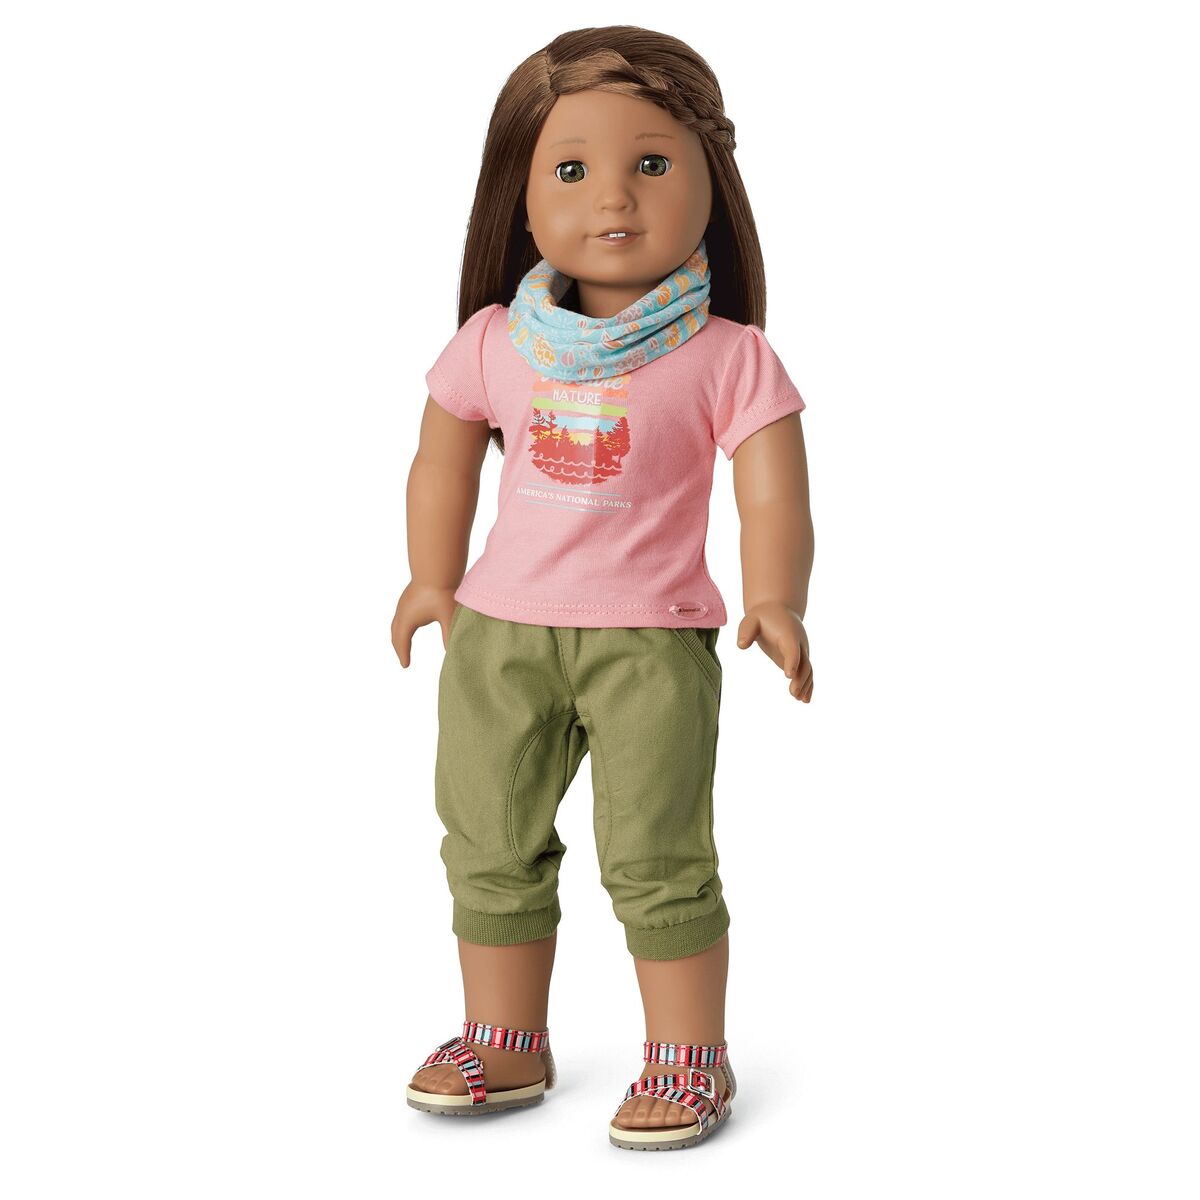 Explore the Parks Outfit | American Girl Wiki | Fandom